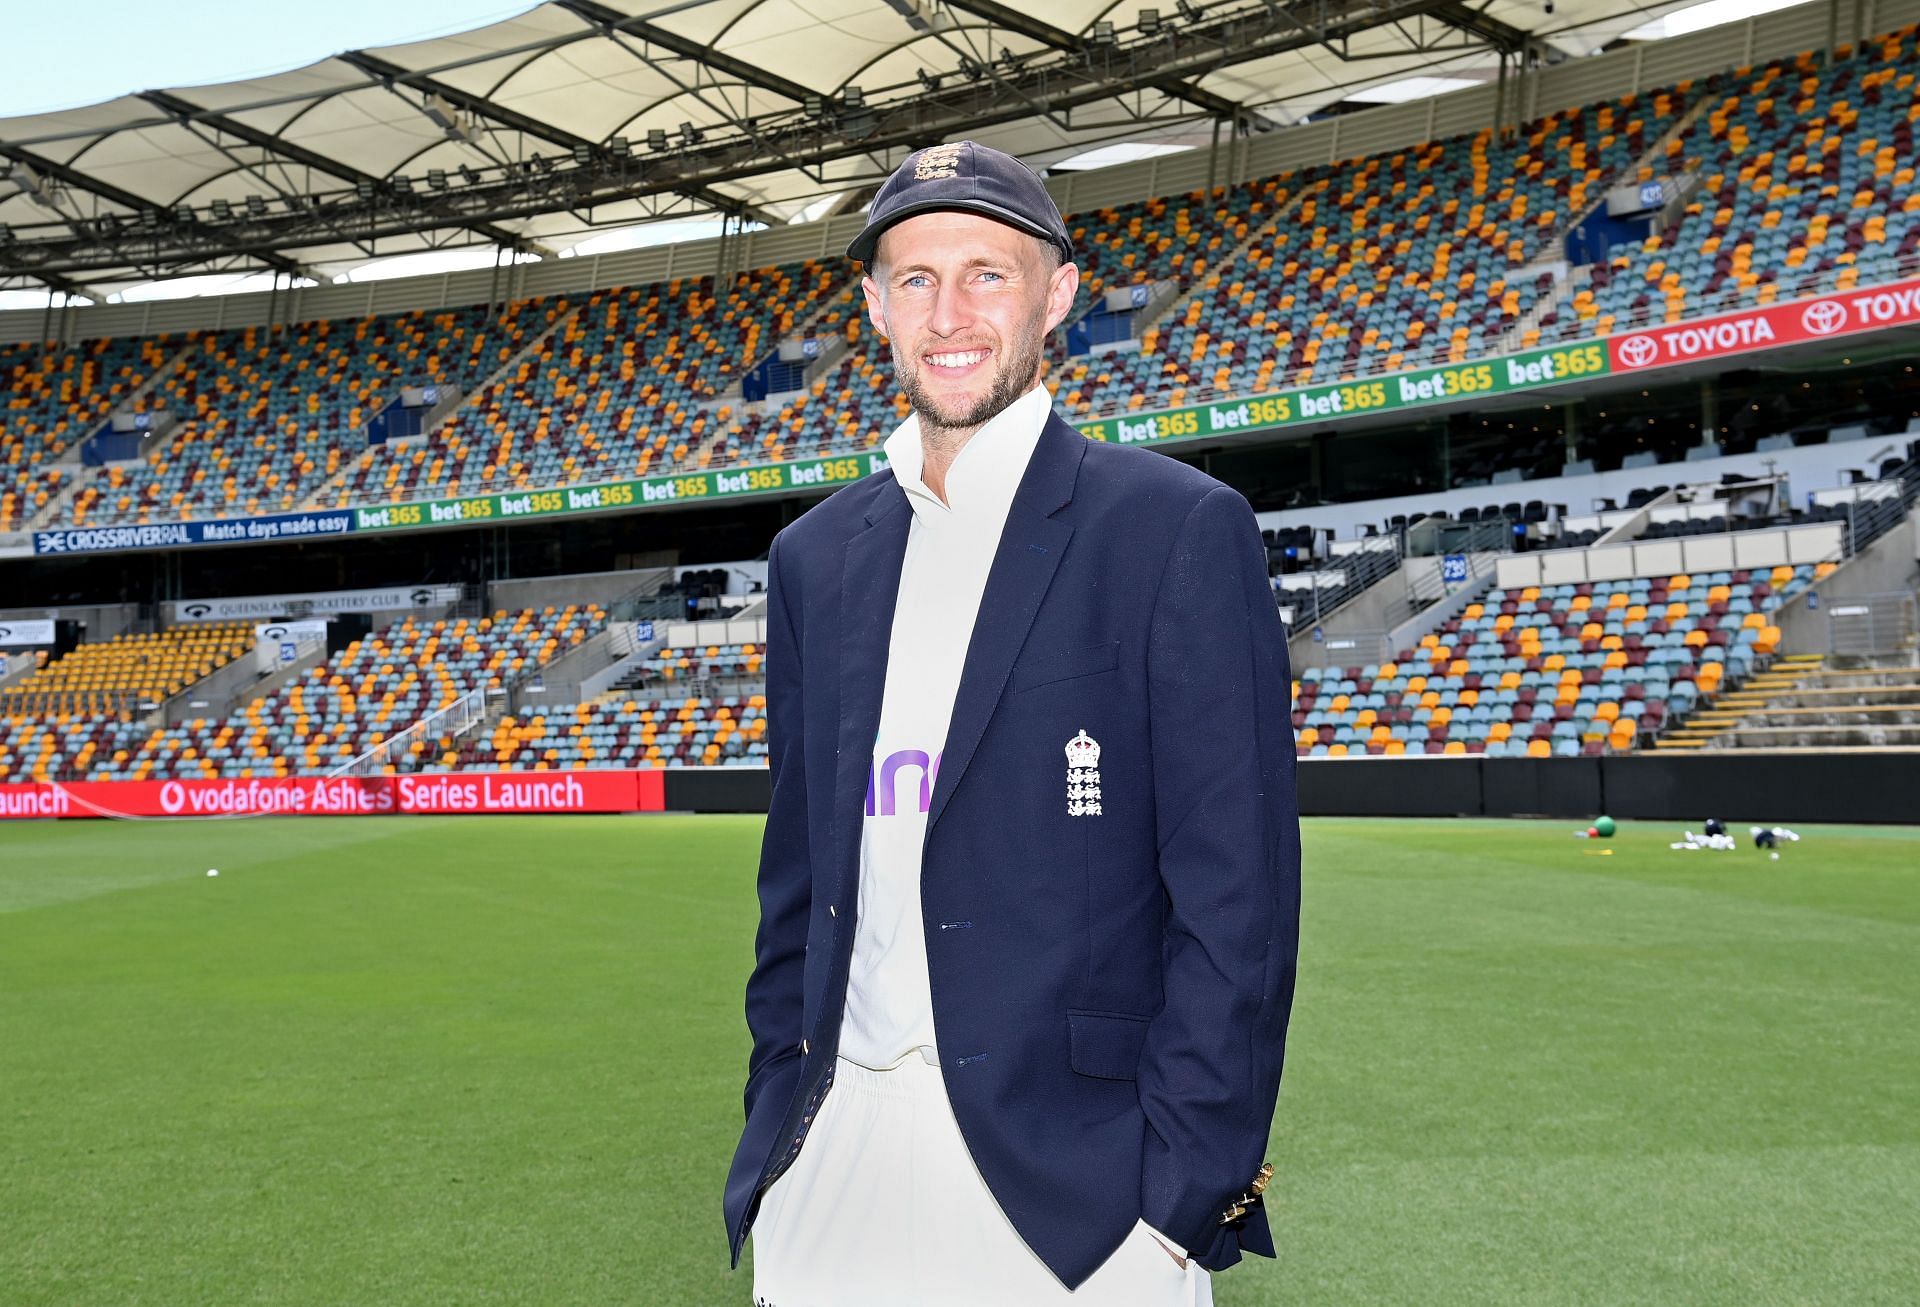 Ashes Series Launch, Photo Getty images